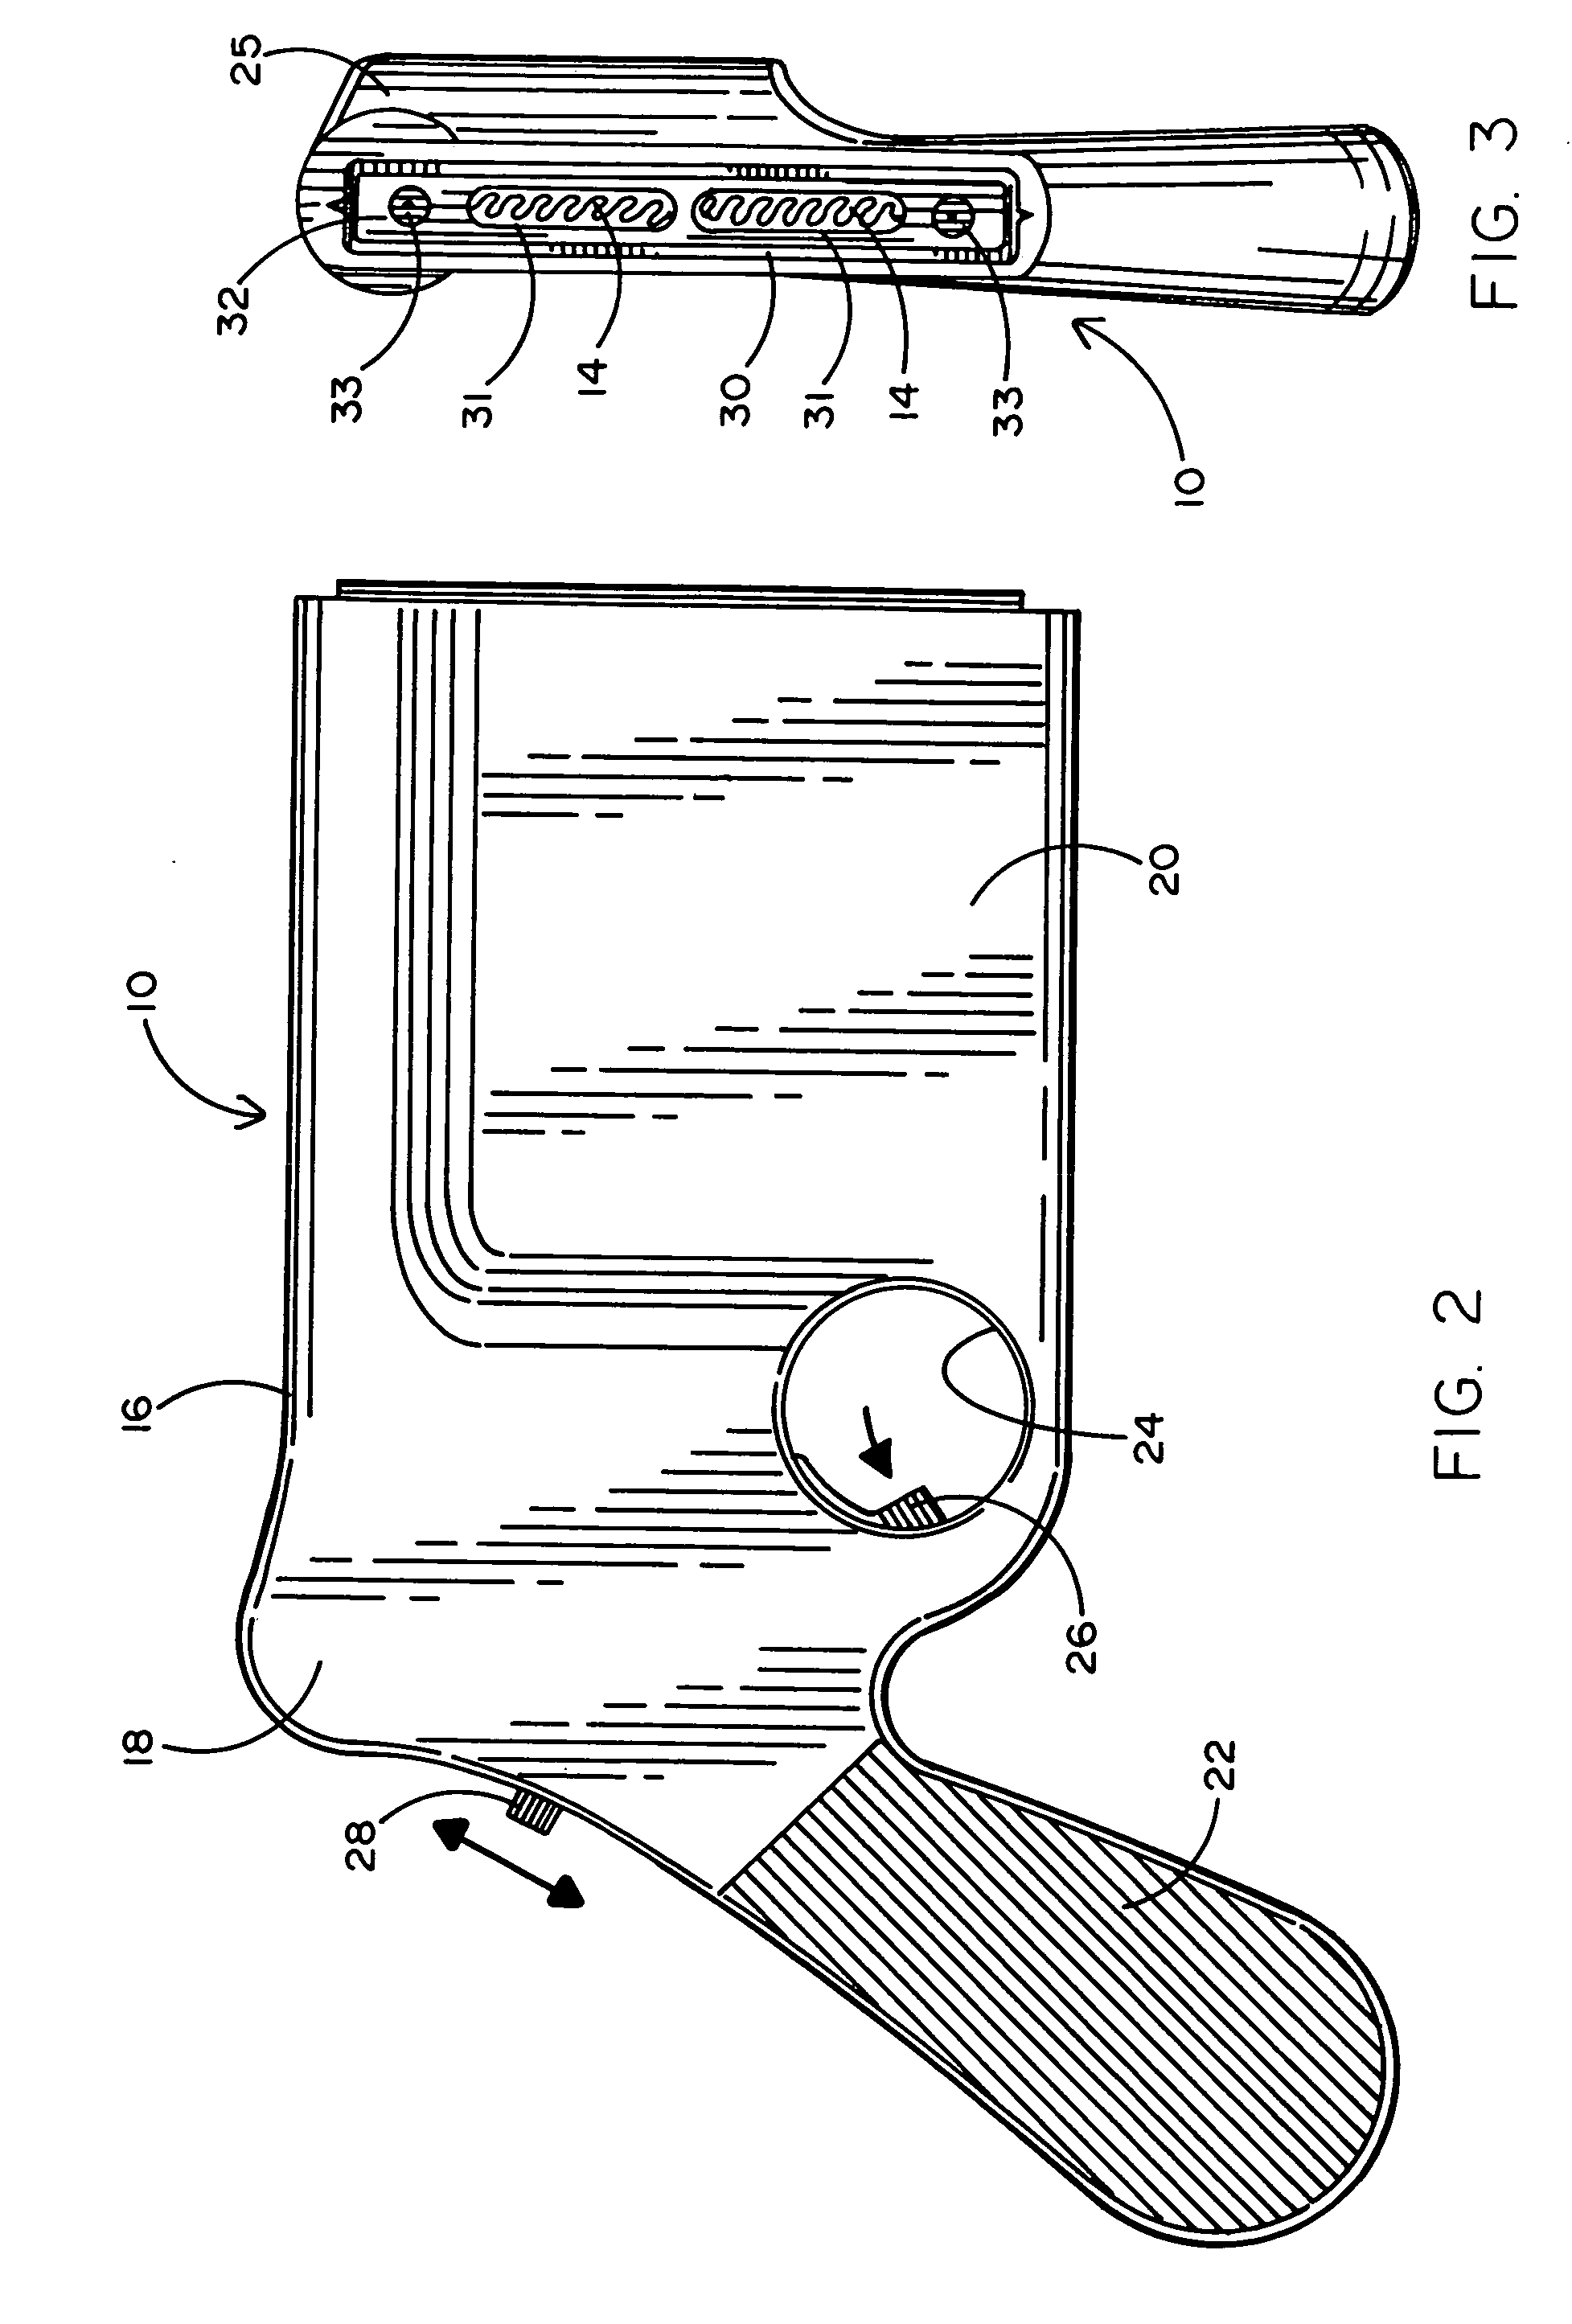 Non-lethal electrical discharge weapon having a slim profile